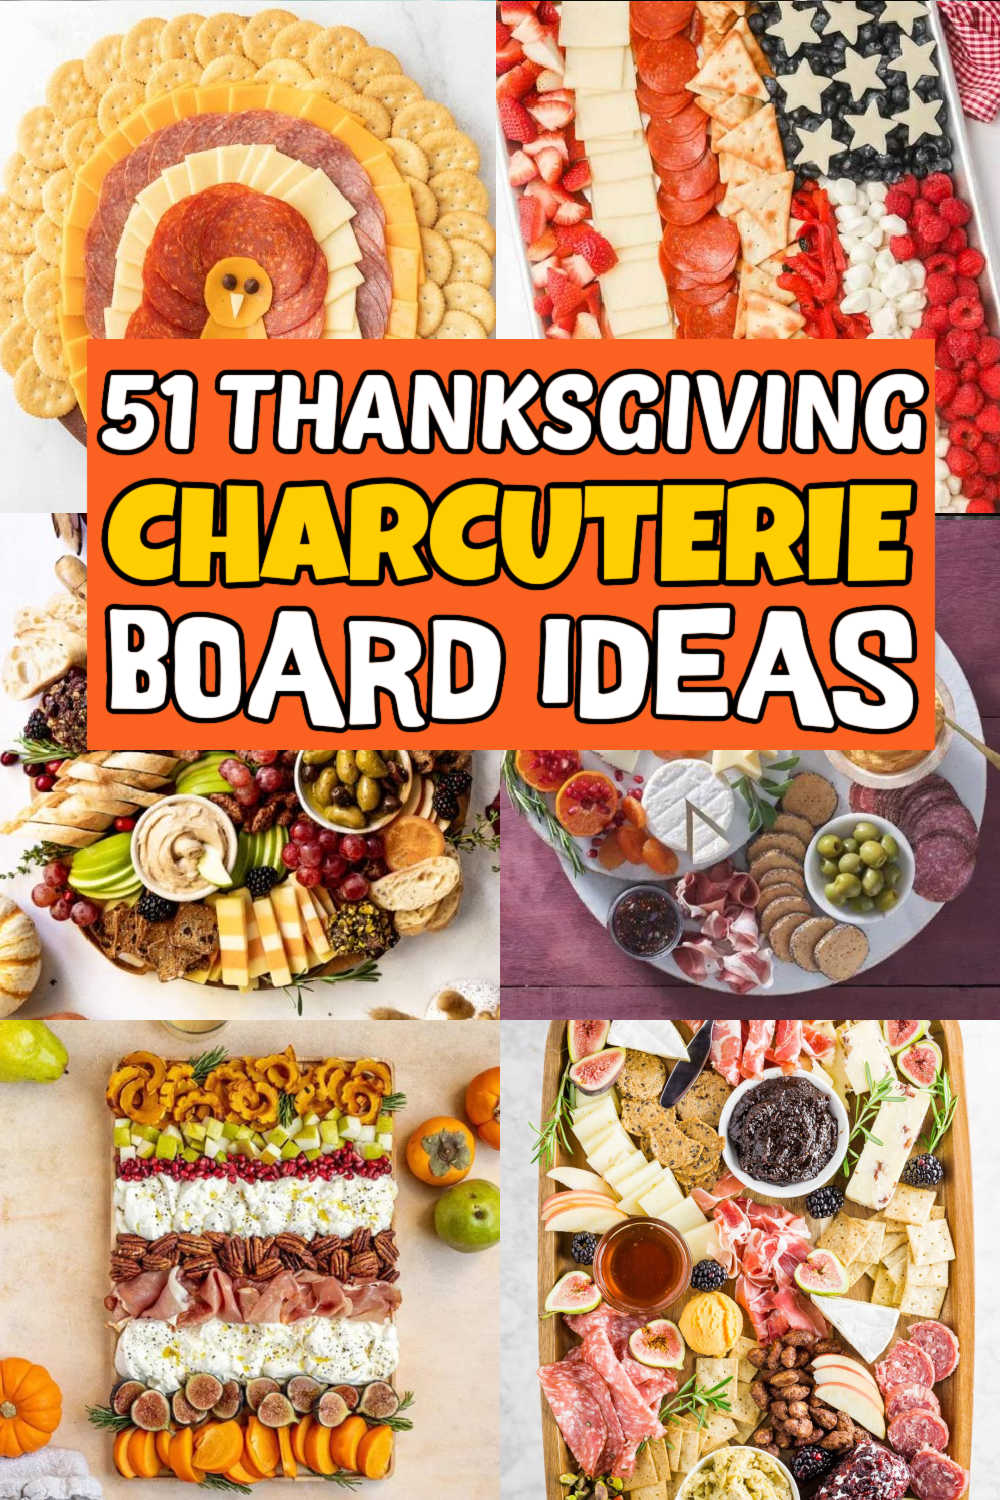 Get ready to gobble up the ultimate feast for your eyes and taste buds with Thanksgiving charcuterie board ideas. From savory meats and cheeses to sweet treats and seasonal fruits, this delectable delights will have your guests drooling. #eatingonadime #thanksgivingcharcuterieboardideas #charcuterieboard